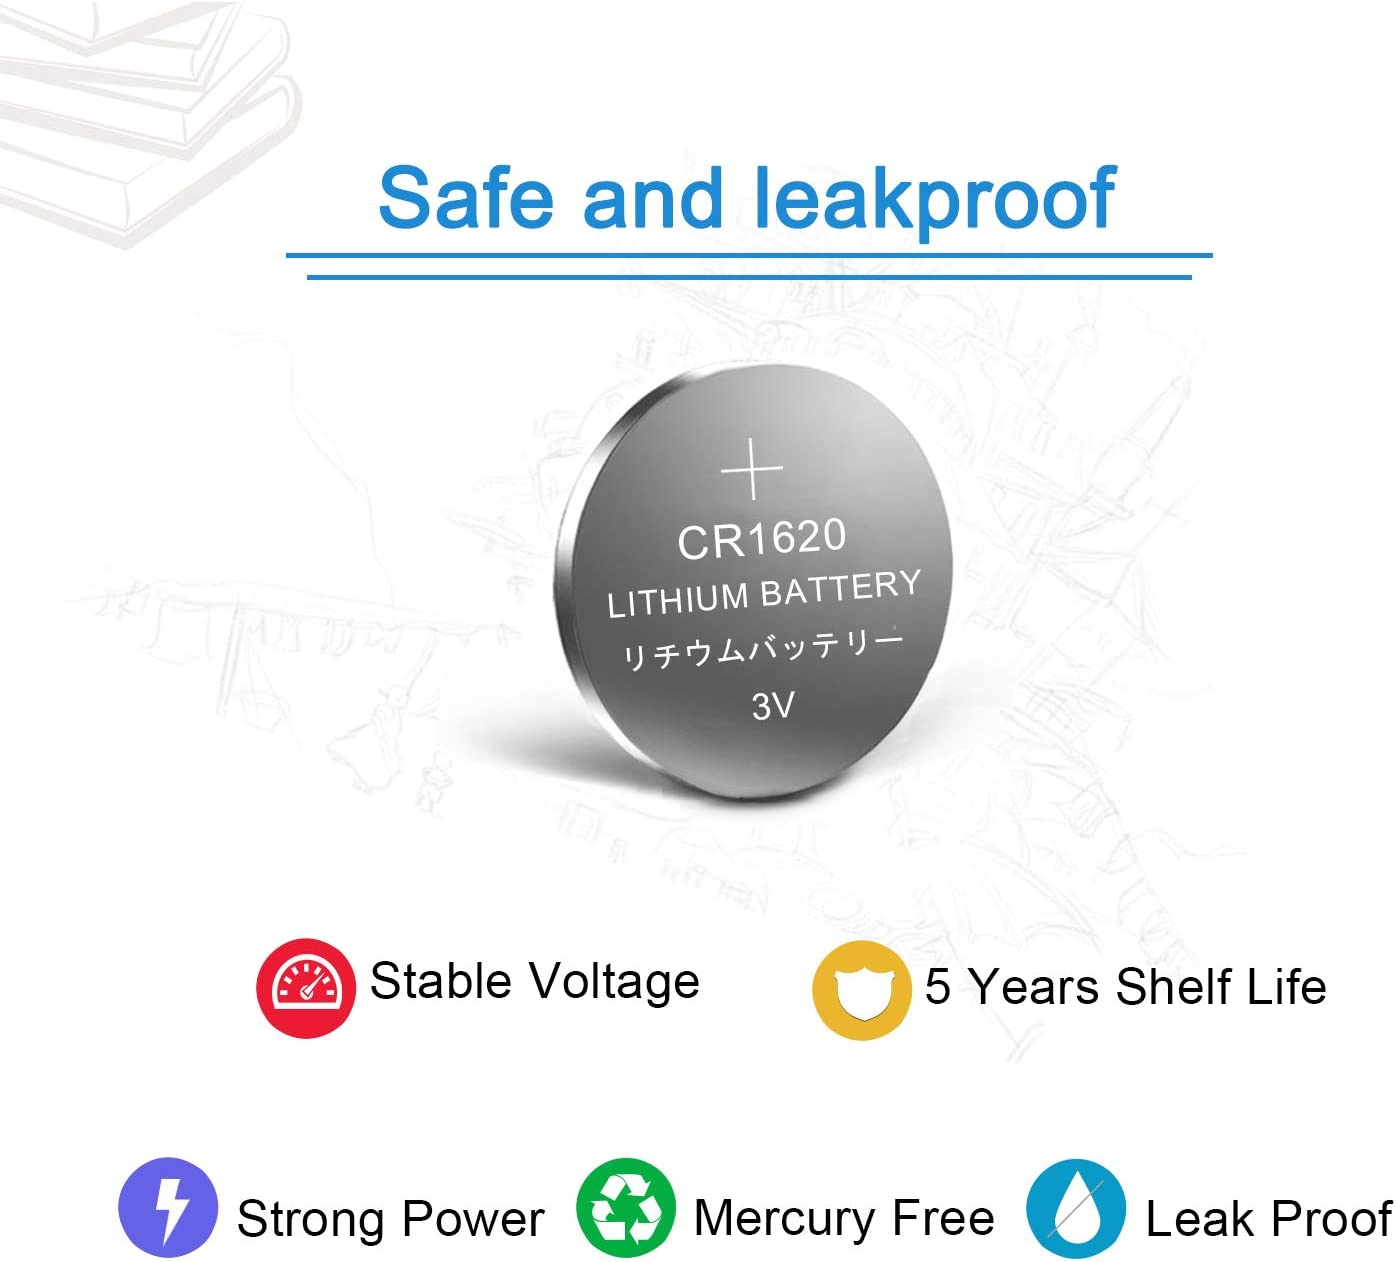 【5-Year Warranty】 SURPOWER CR1620 3V Lithium Battery -10 Pack